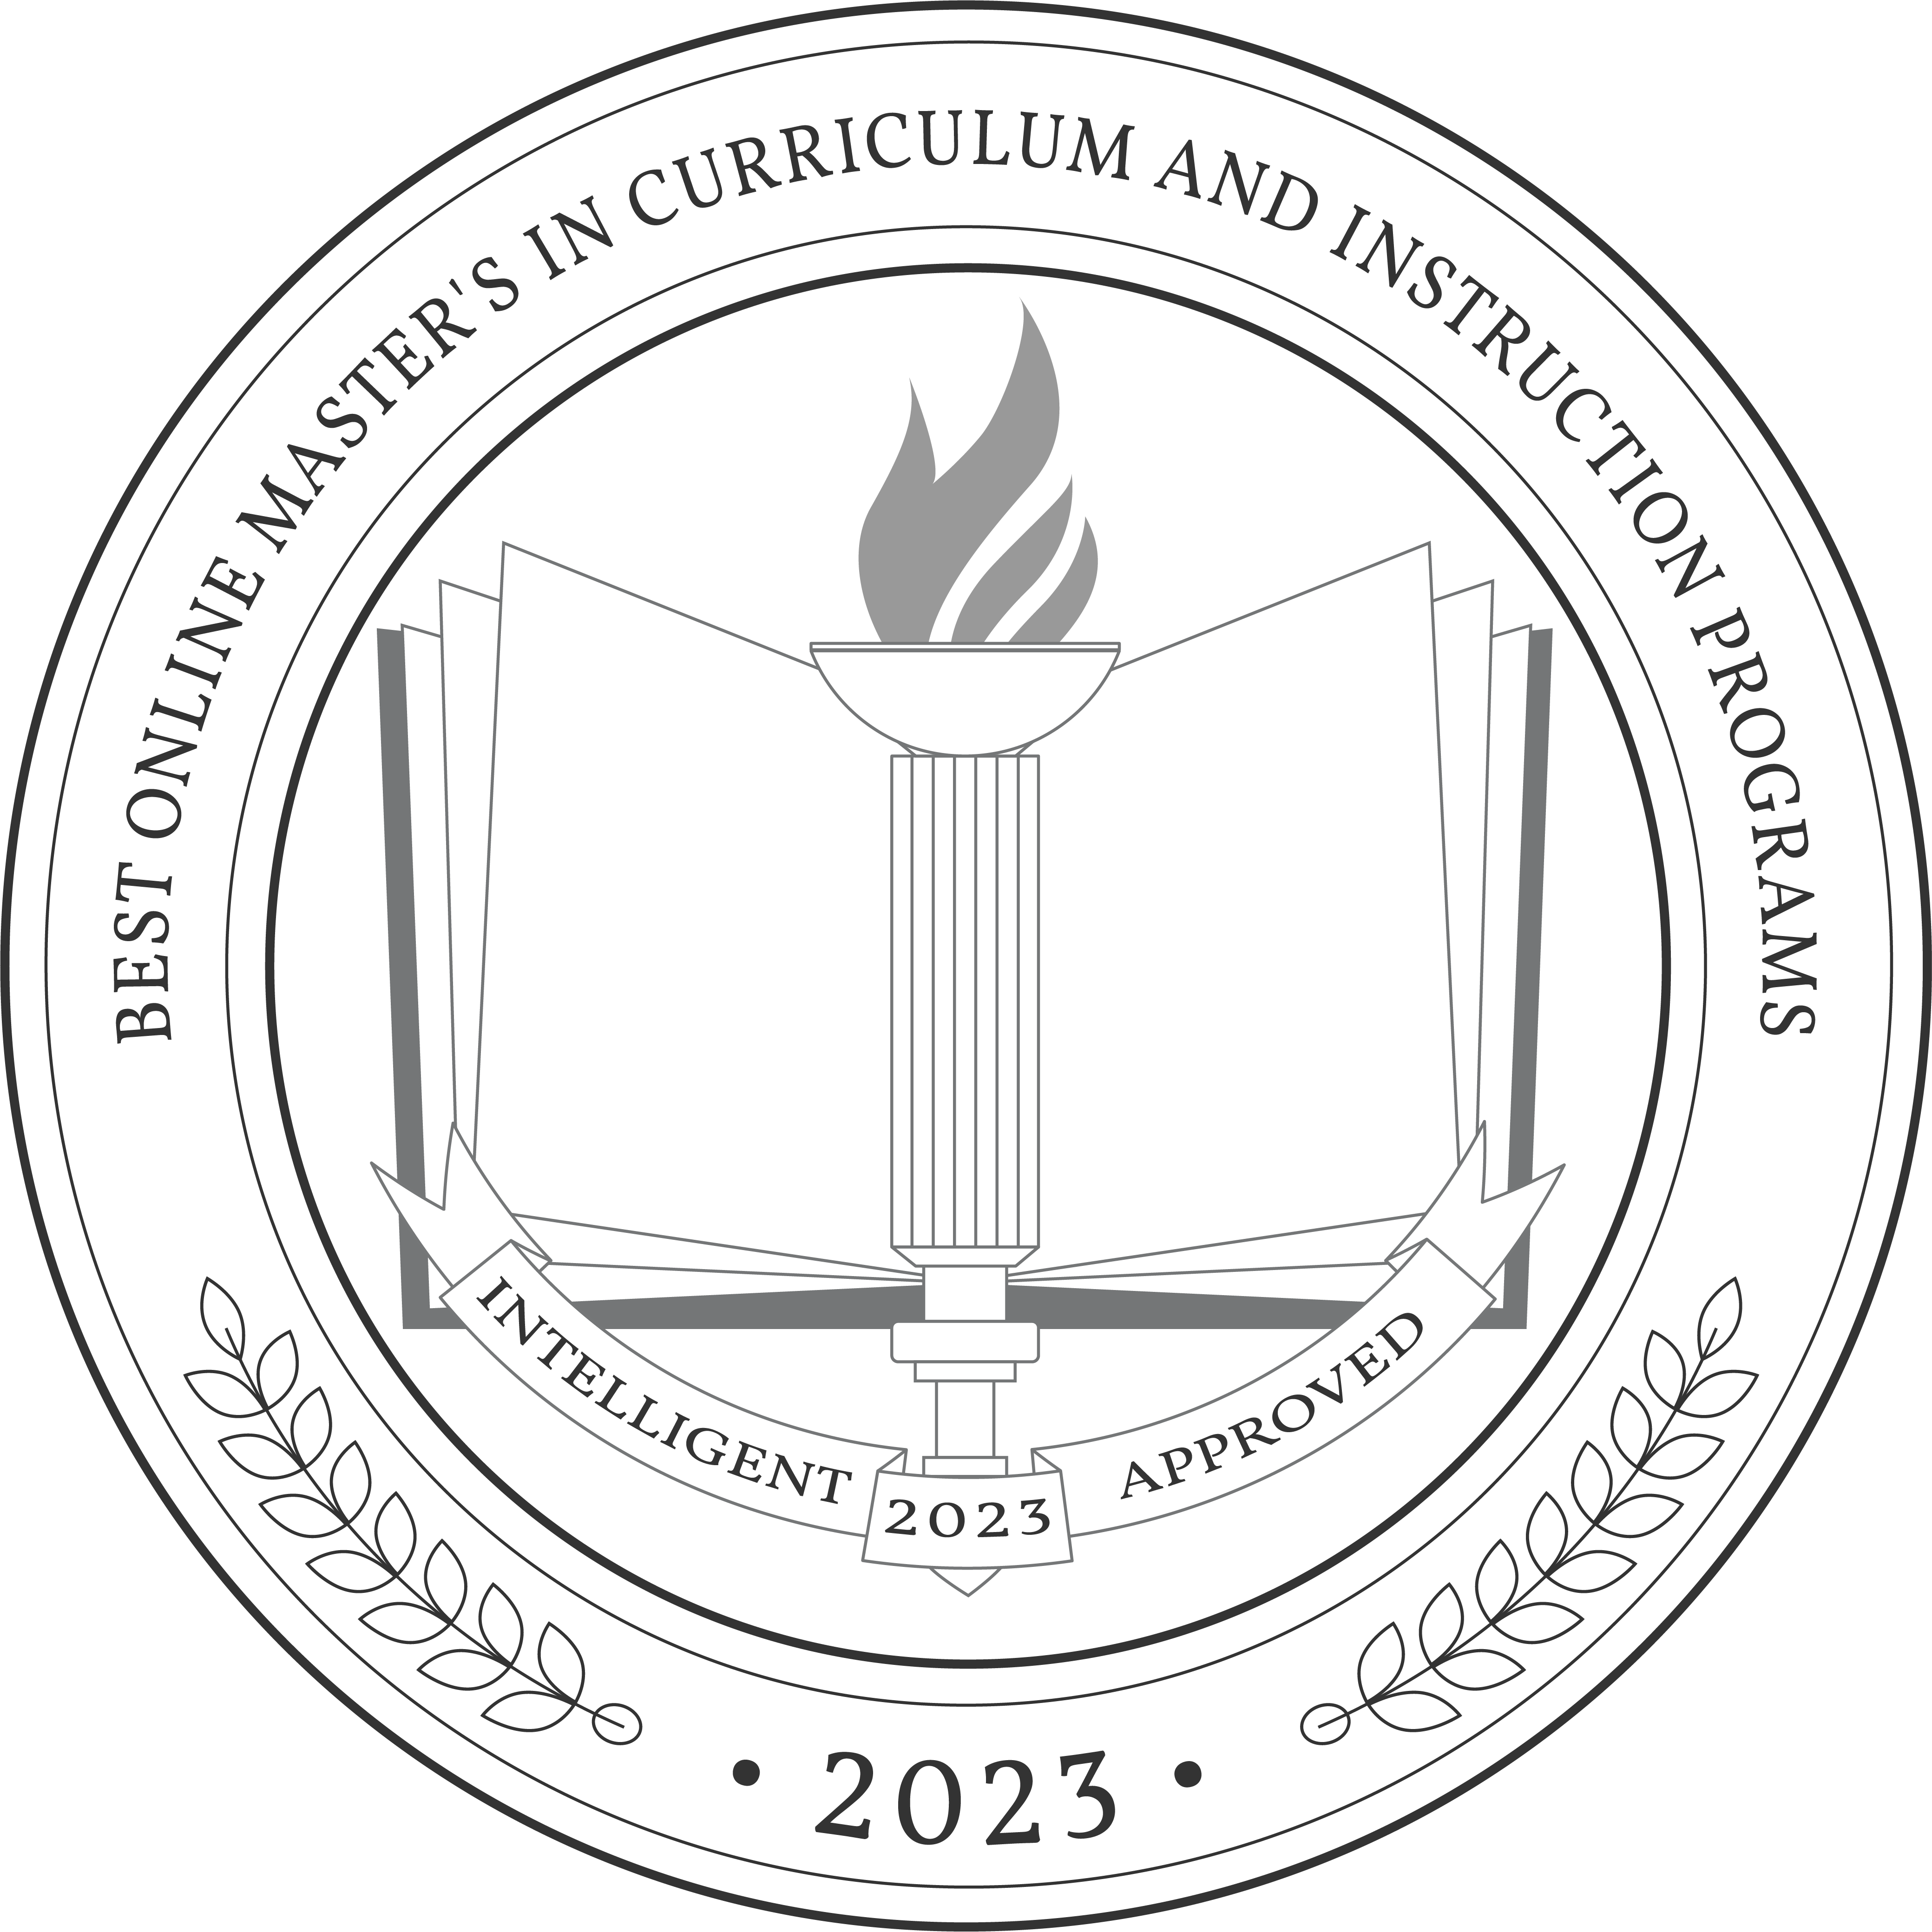 Best Online Master's in Curriculum and Instruction Programs badge